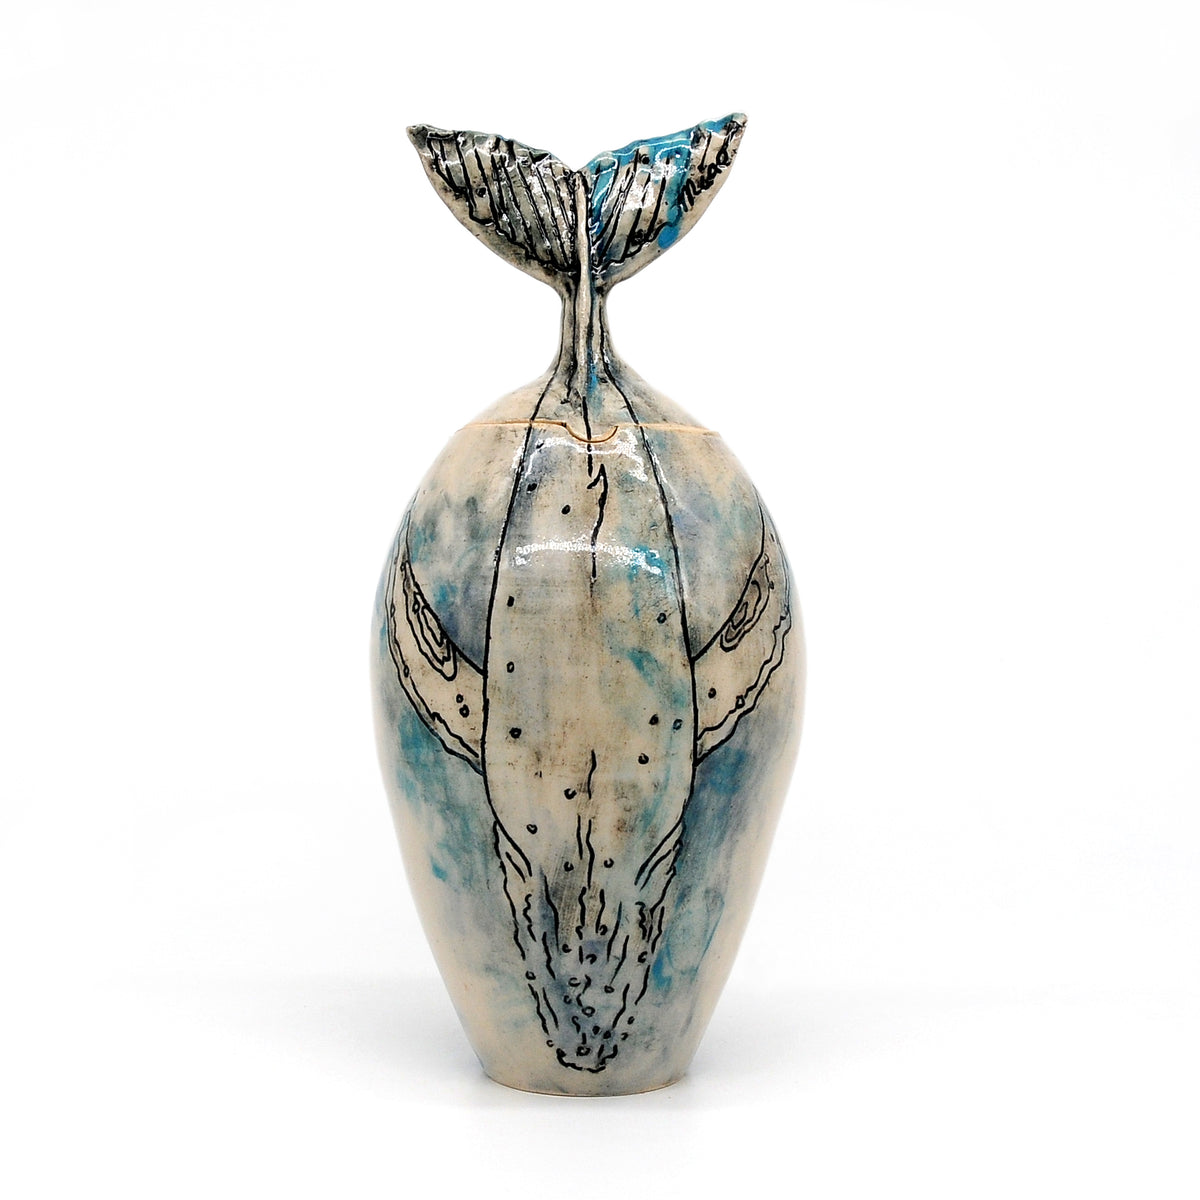 &#39;MK21 Whale’ by Miae Kim ceramics, available at Padstow Gallery, Cornwall